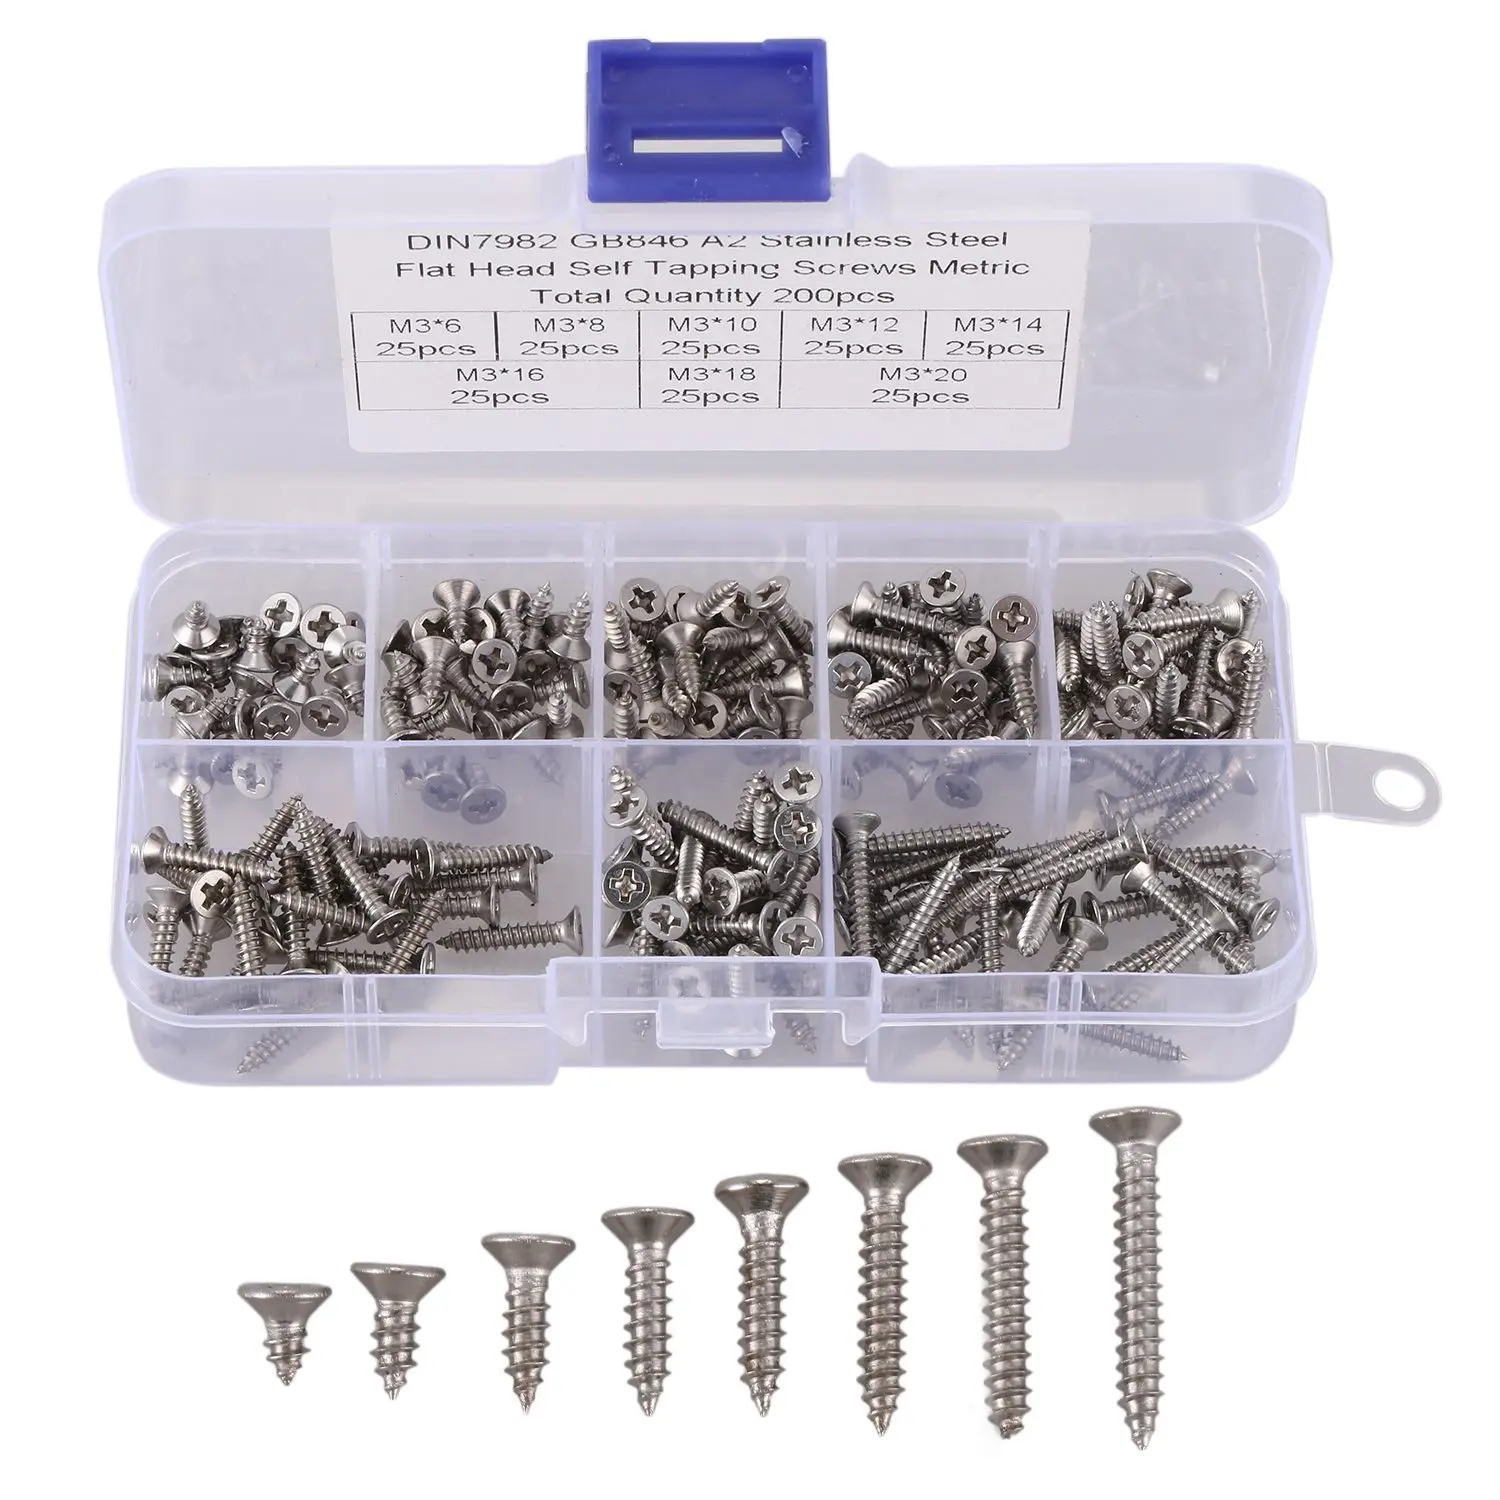 

200Pcs M3 Stainless Steel Flat Head Screws Kits High Strength Self-Tapping Screws Assortment Set For Wood Furniture